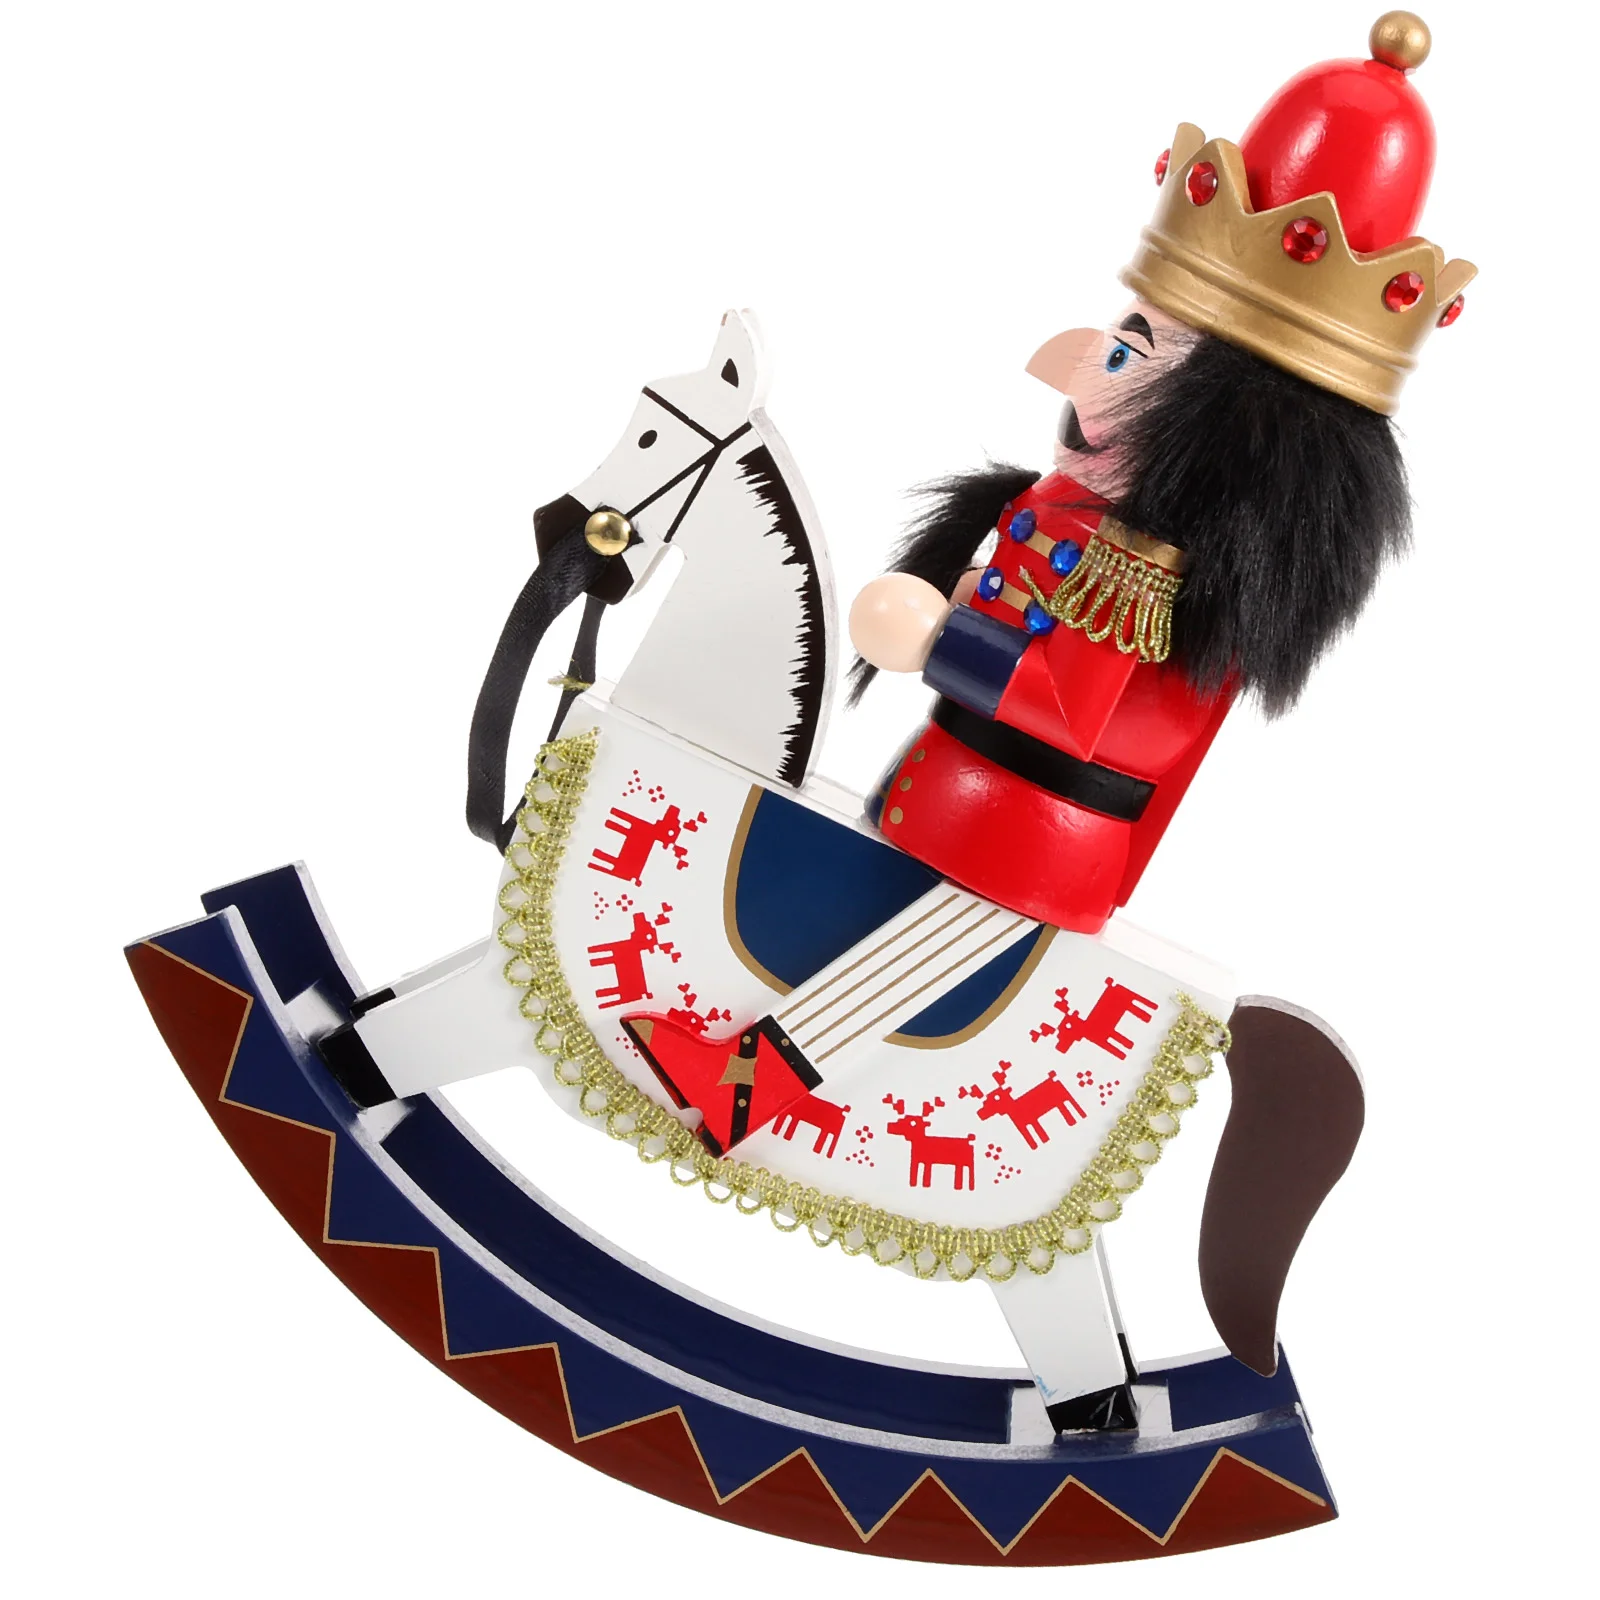 

Crafts Christmas Dining Table Decor Nutcracker Soldiers Wooden Xmas Nutcrackers